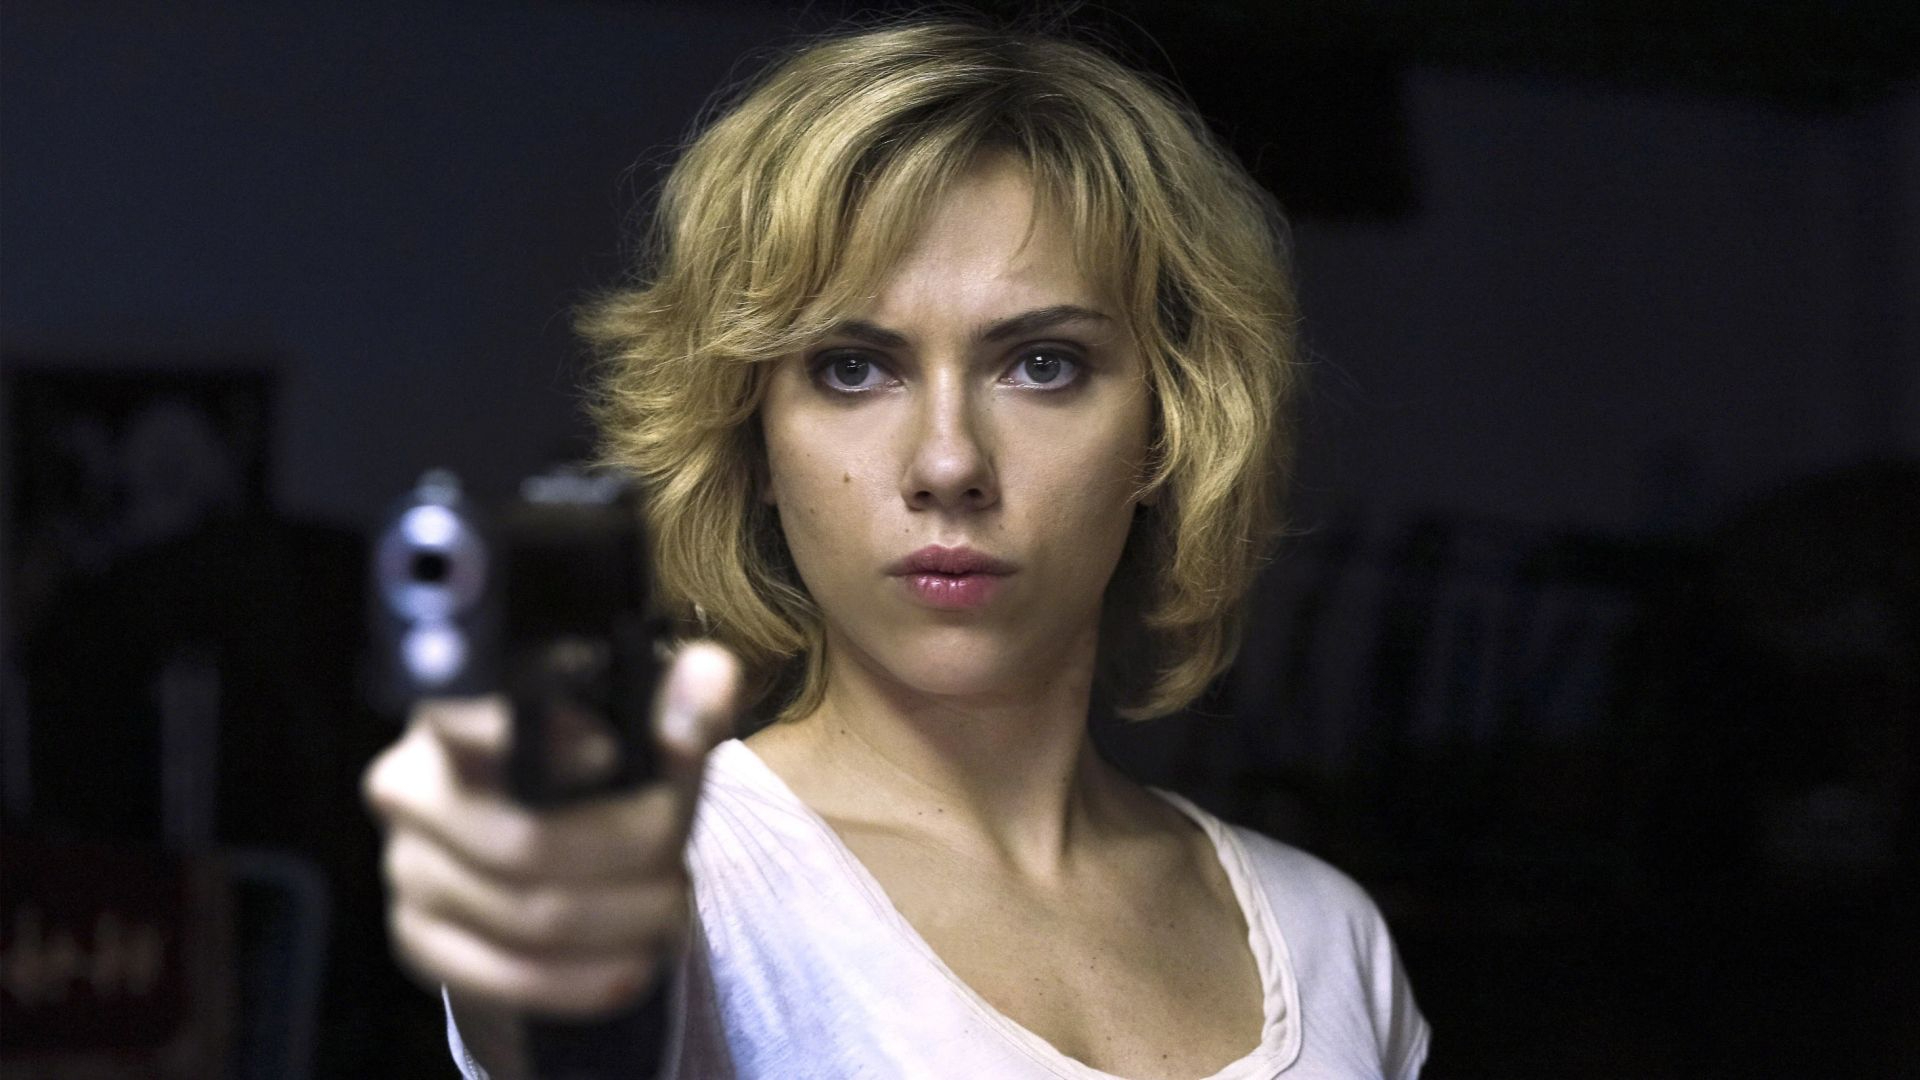 The Best Scarlett Johansson Movie Is One In Which We Don't See Her